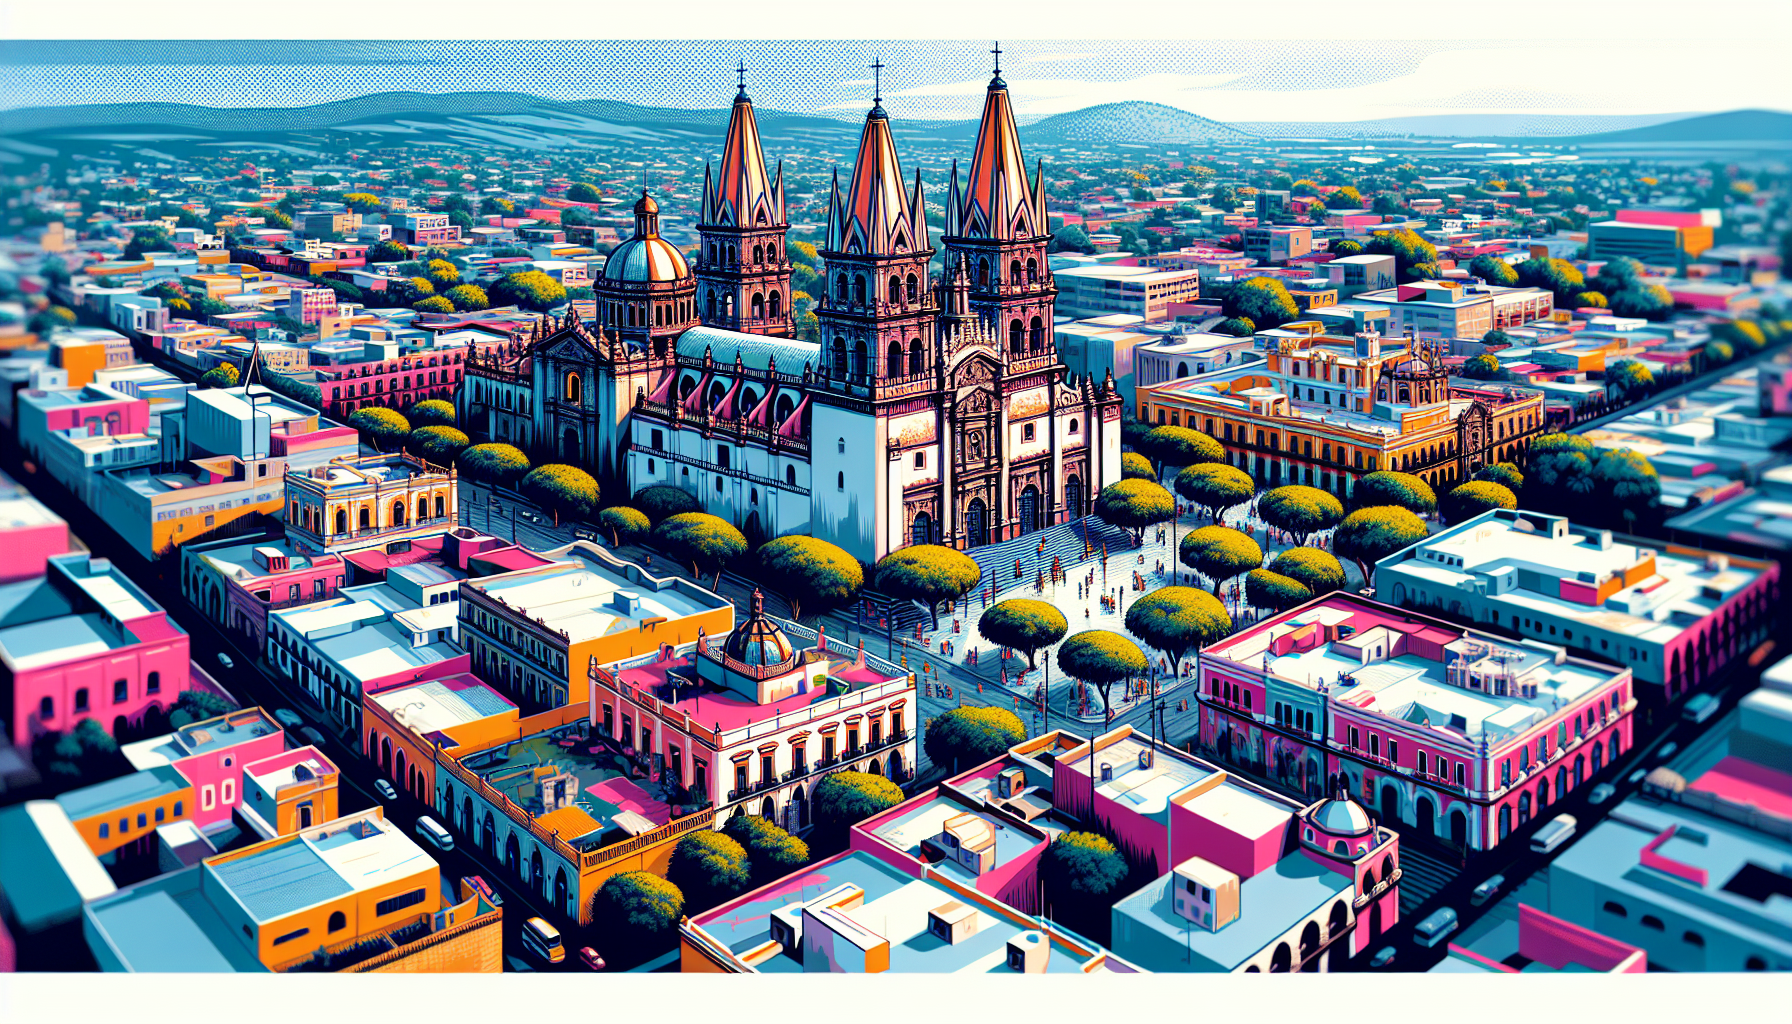 Create an image of a stunning aerial view of the iconic Guadalajara cathedral, surrounded by the colorful colonial buildings and lush greenery of the historic city center. The image should capture the